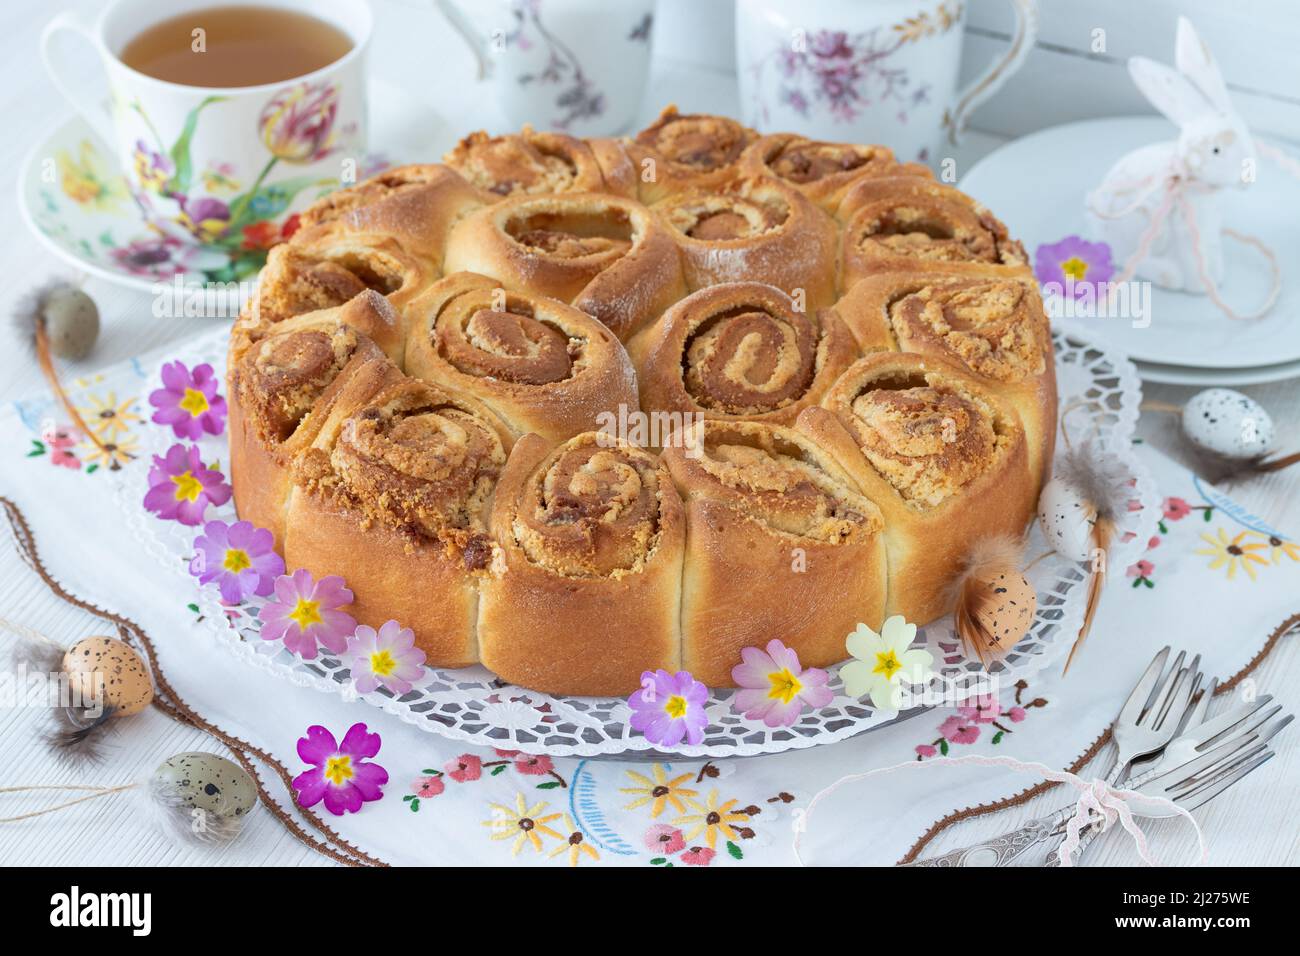 easter bakery dough cake with butter almond cream and caramel Stock Photo